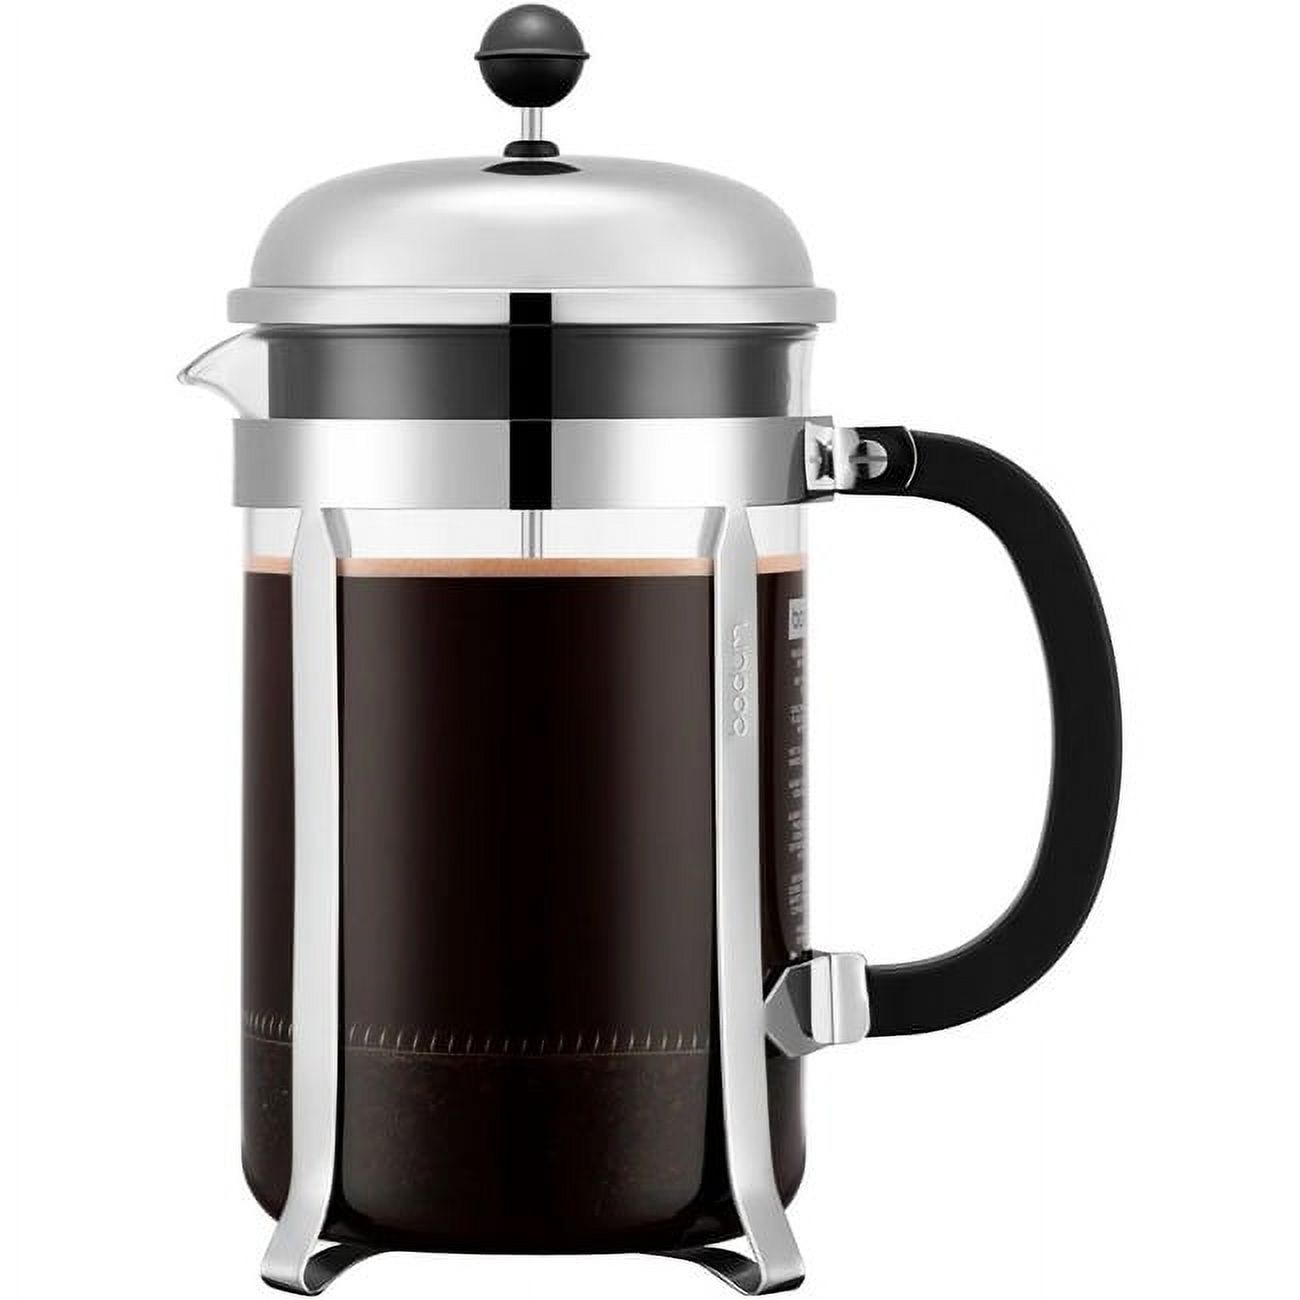 BODUM Chambord French Press Coffee Maker, 51 Ounce, Stainless Steel - image 2 of 7